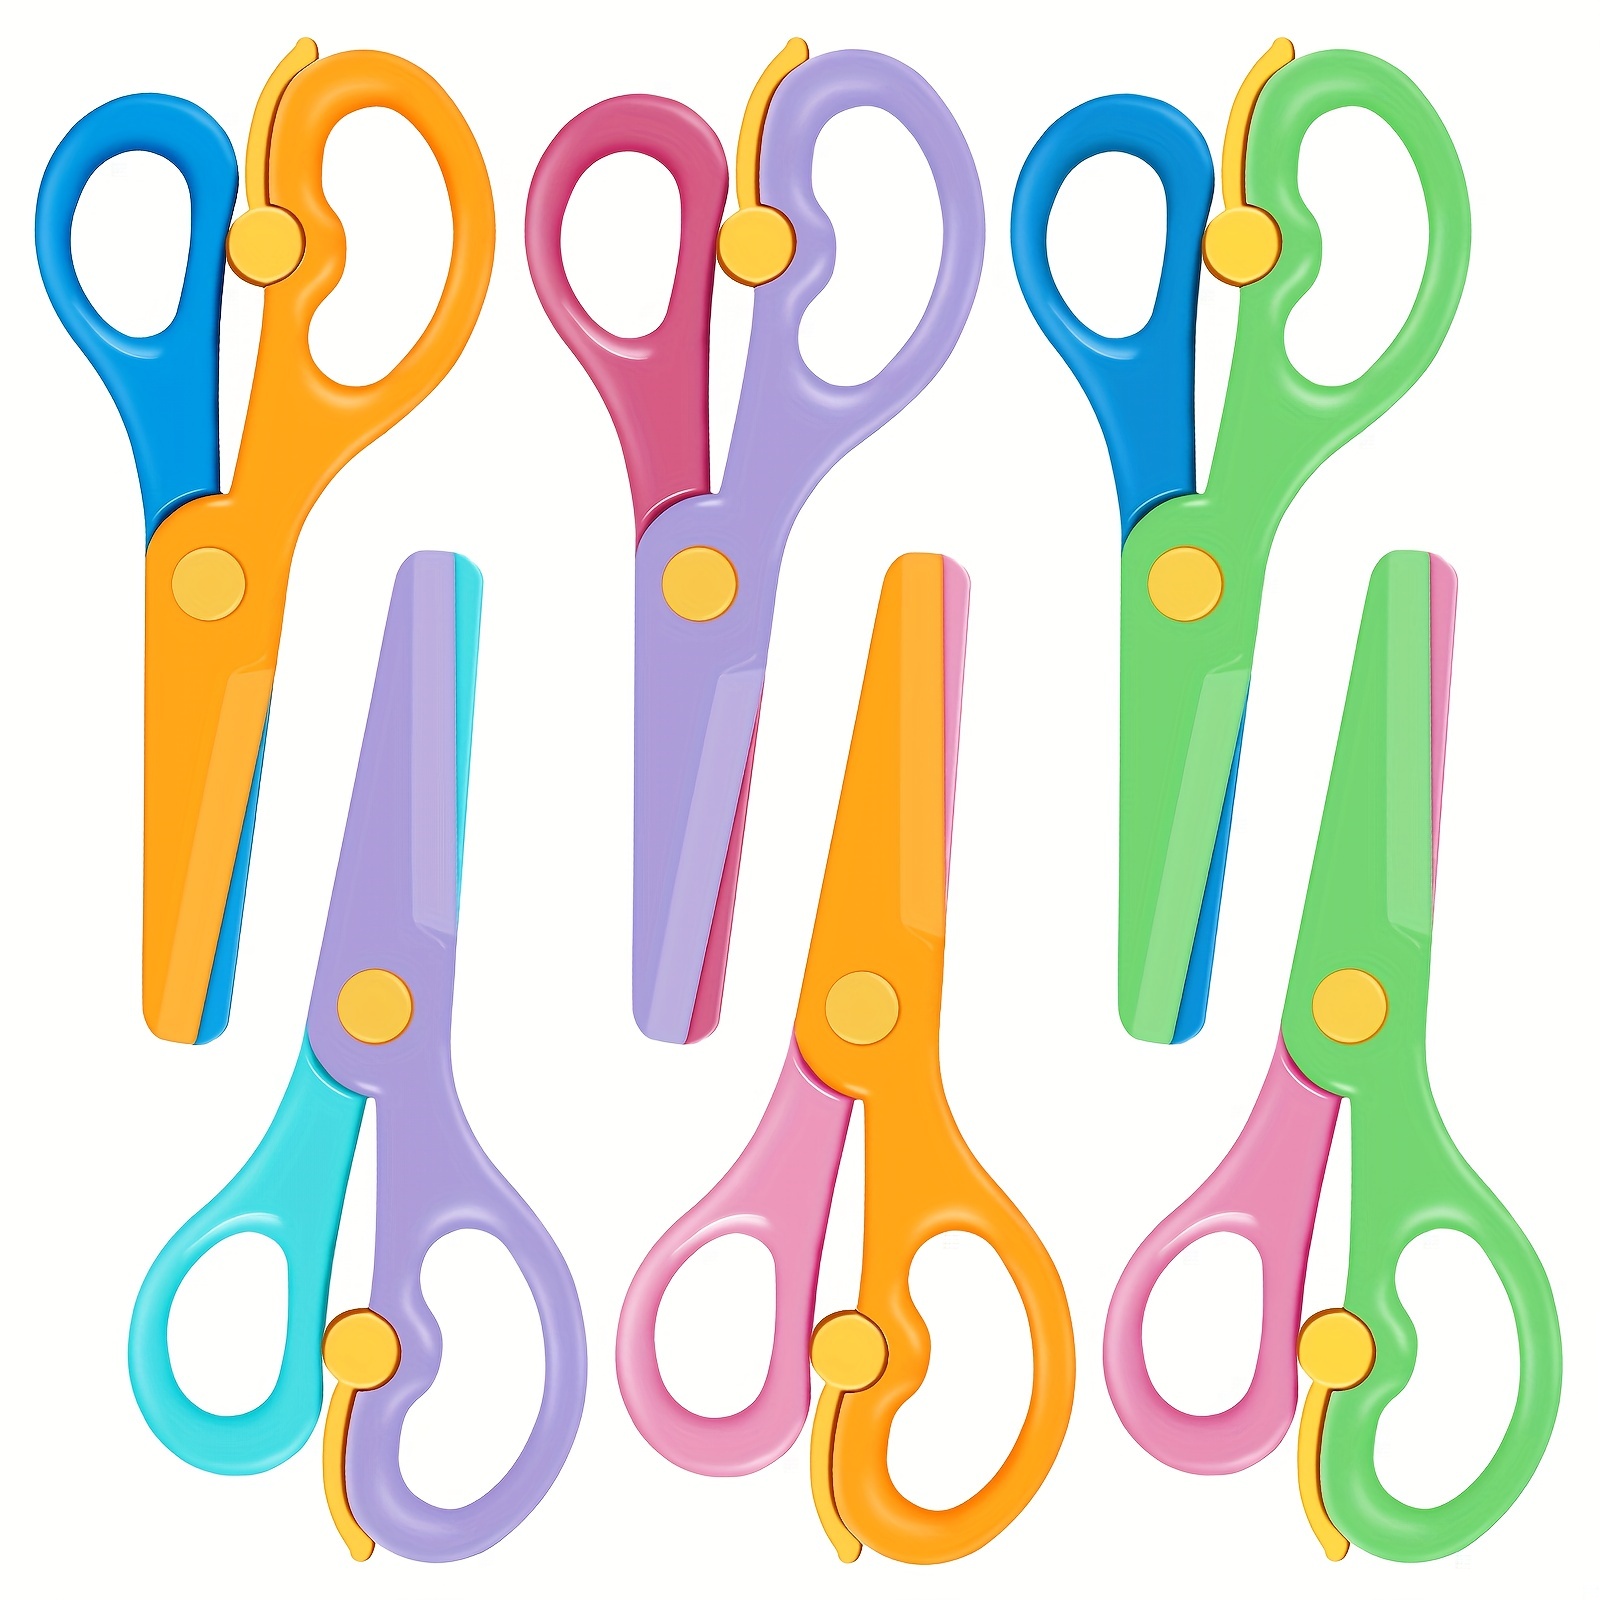 8 Pack for Adults Kids Colorful Safety Art Craft Scissors Student